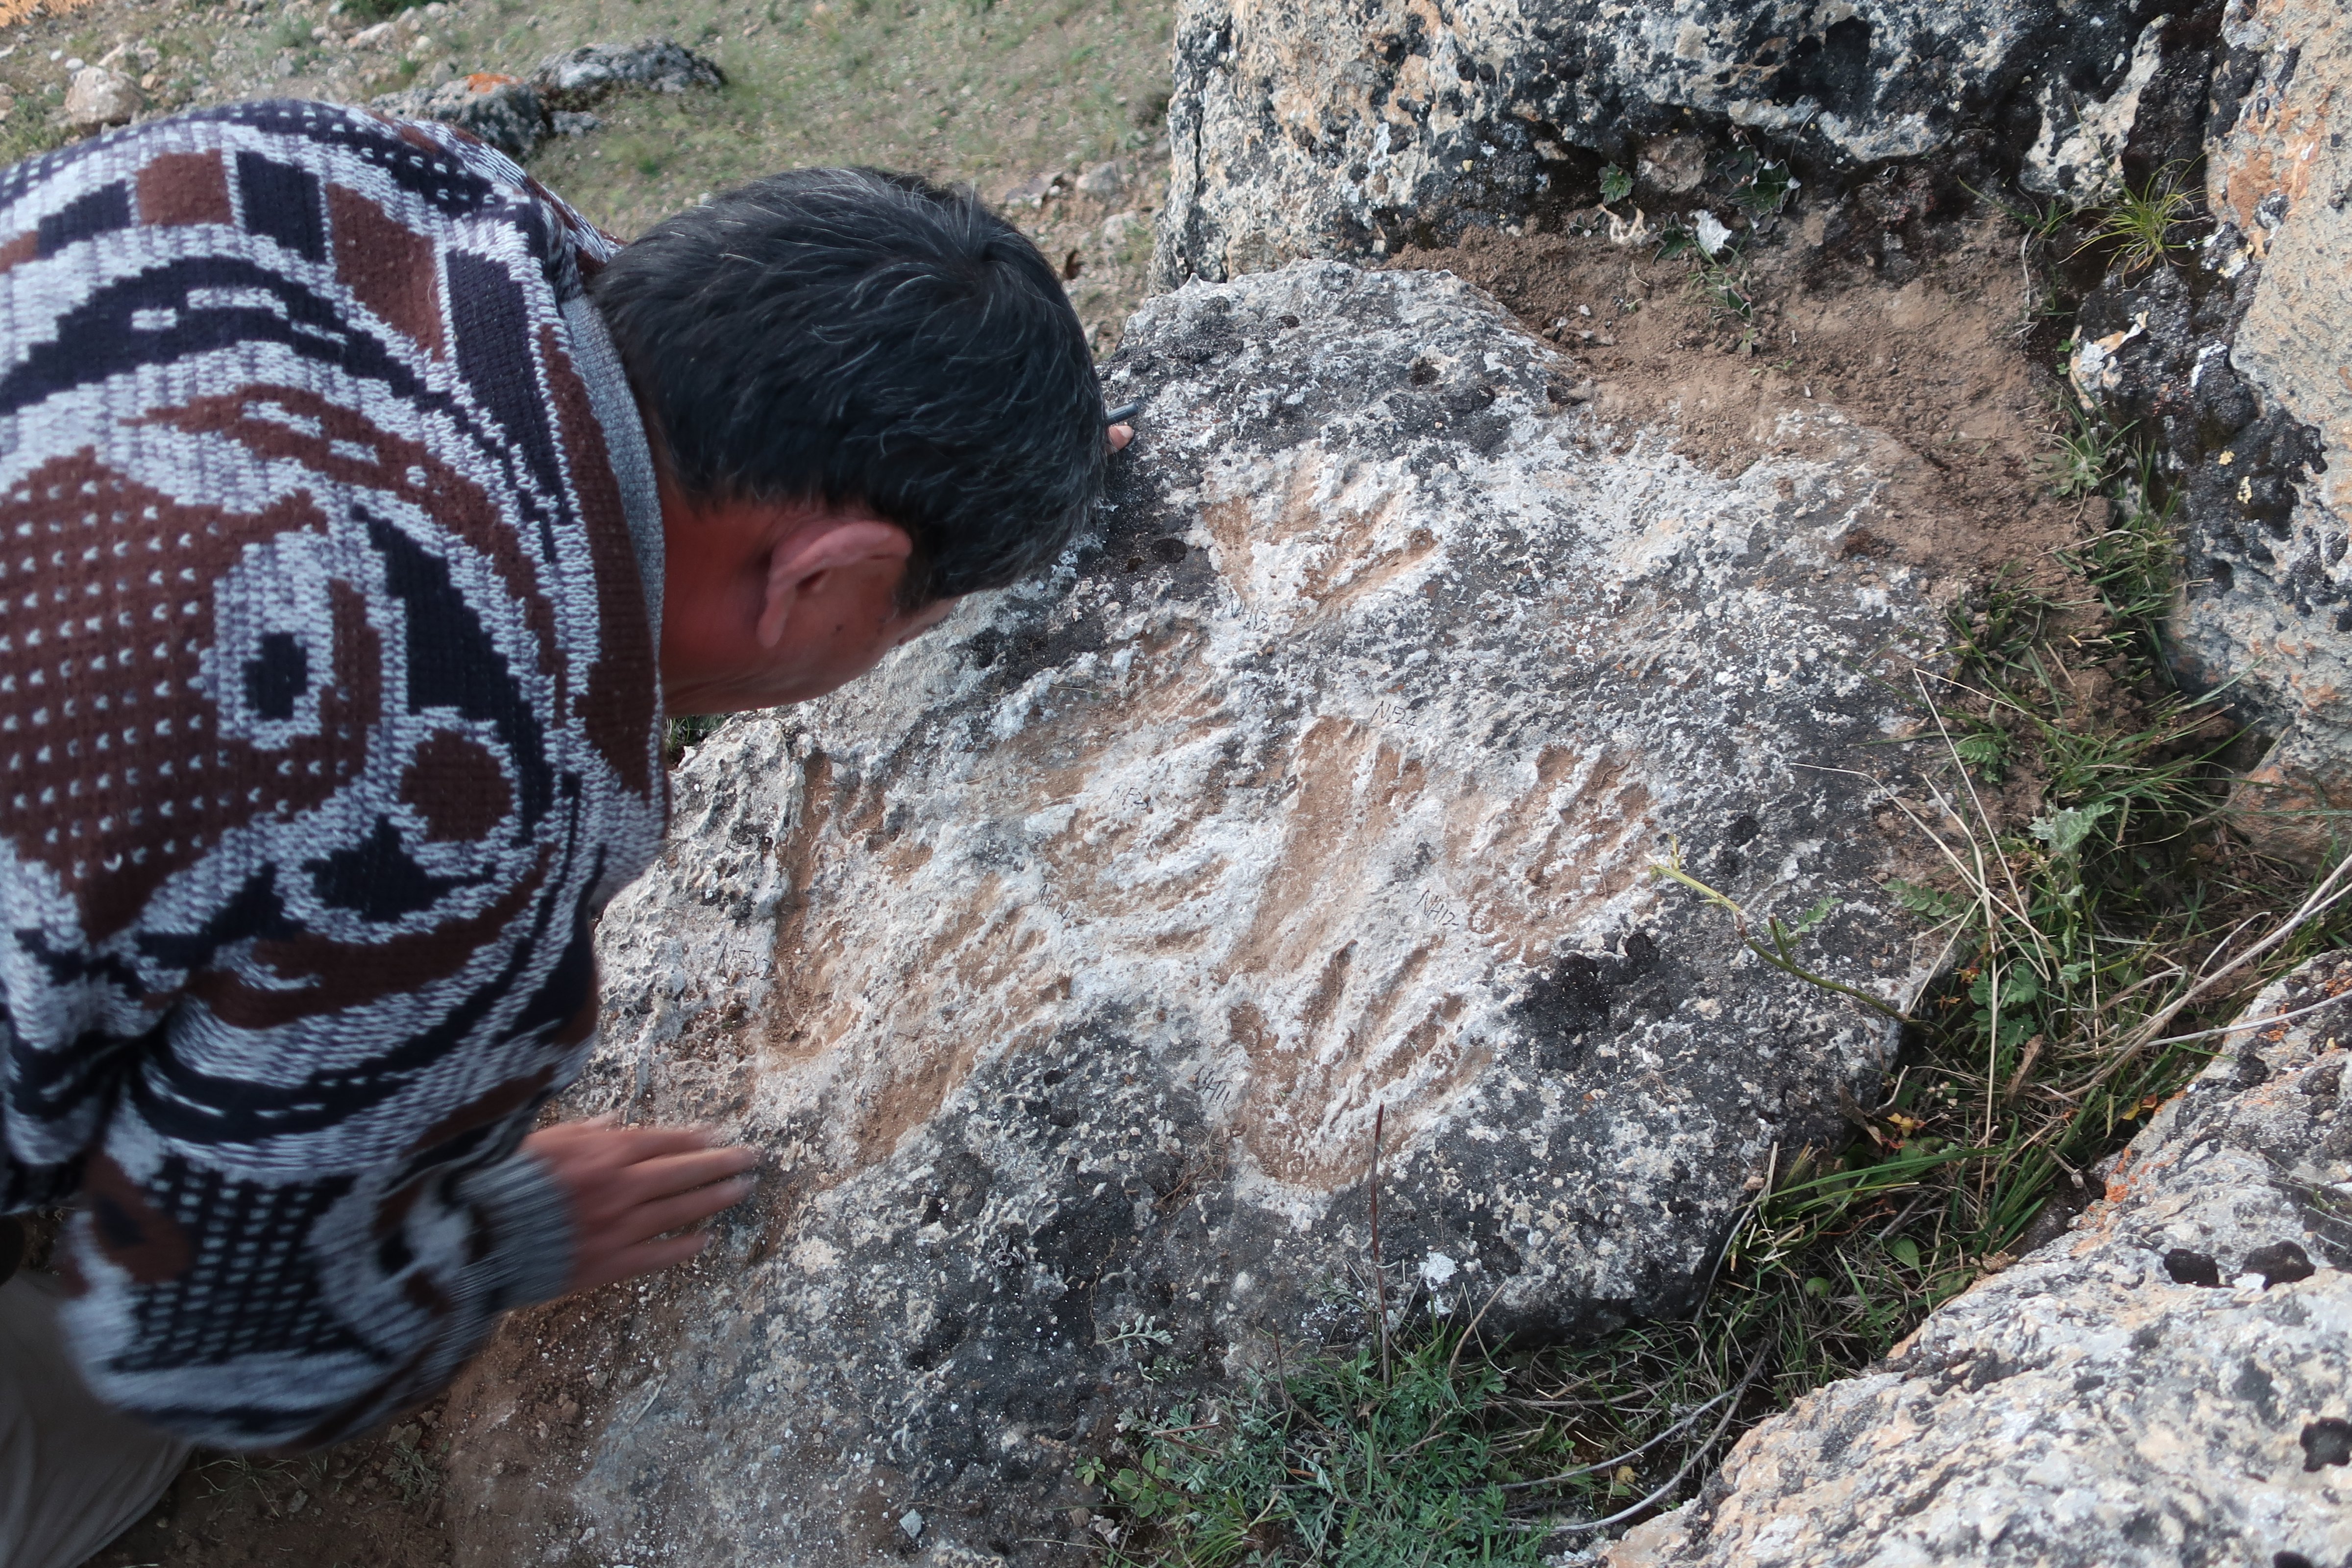 Dr. David Zhang, a scientist from Guangzhou University in China, examines the footprints and handprints on the travertine rock in Quesang, Tibet. These impressions are thought to be the world's oldest parietal art. (Courtesy Dr. David Zhang)